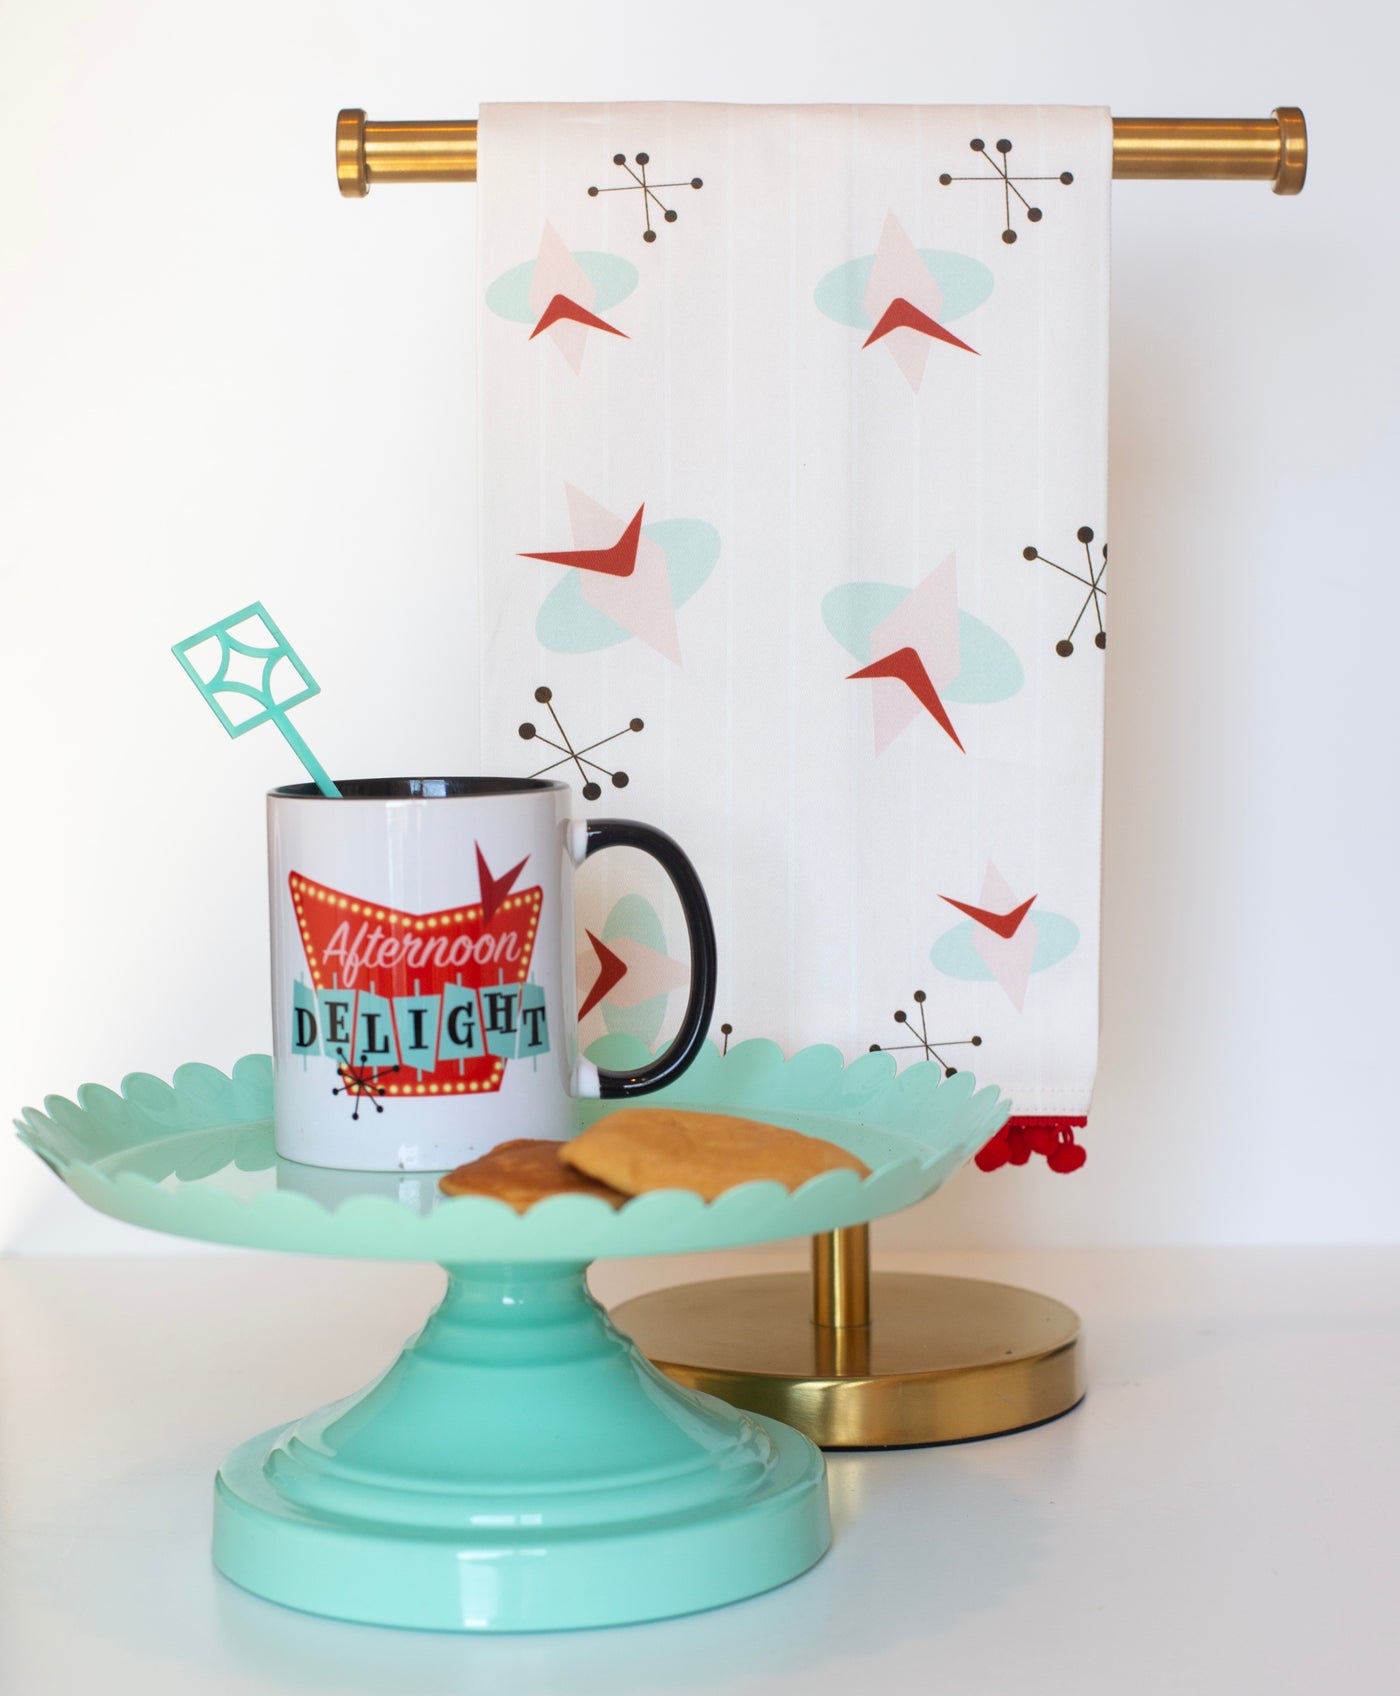 retro cosmic atomic vintage bar towel with chenille trim. Shown with Afternoon delight vintage coffee mug